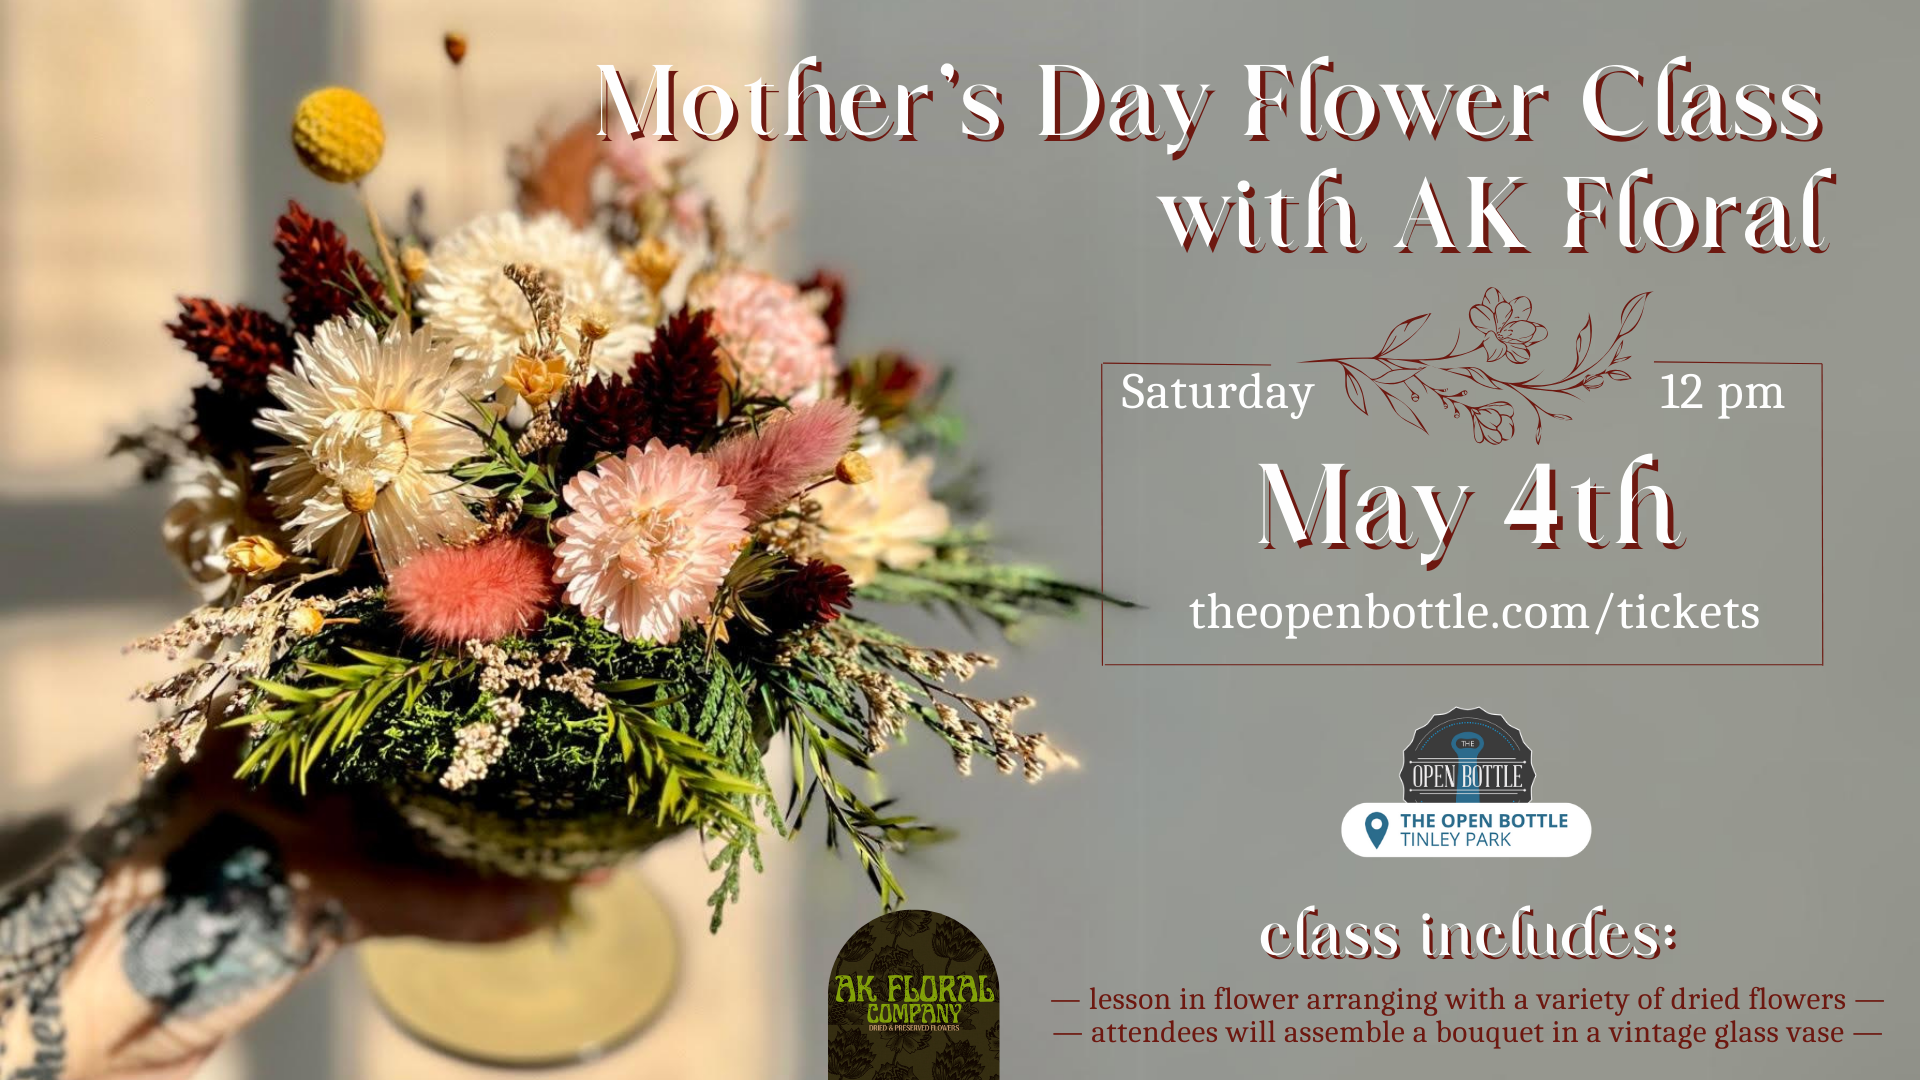 Event: Mother’s Day Flower Class with AK Floral